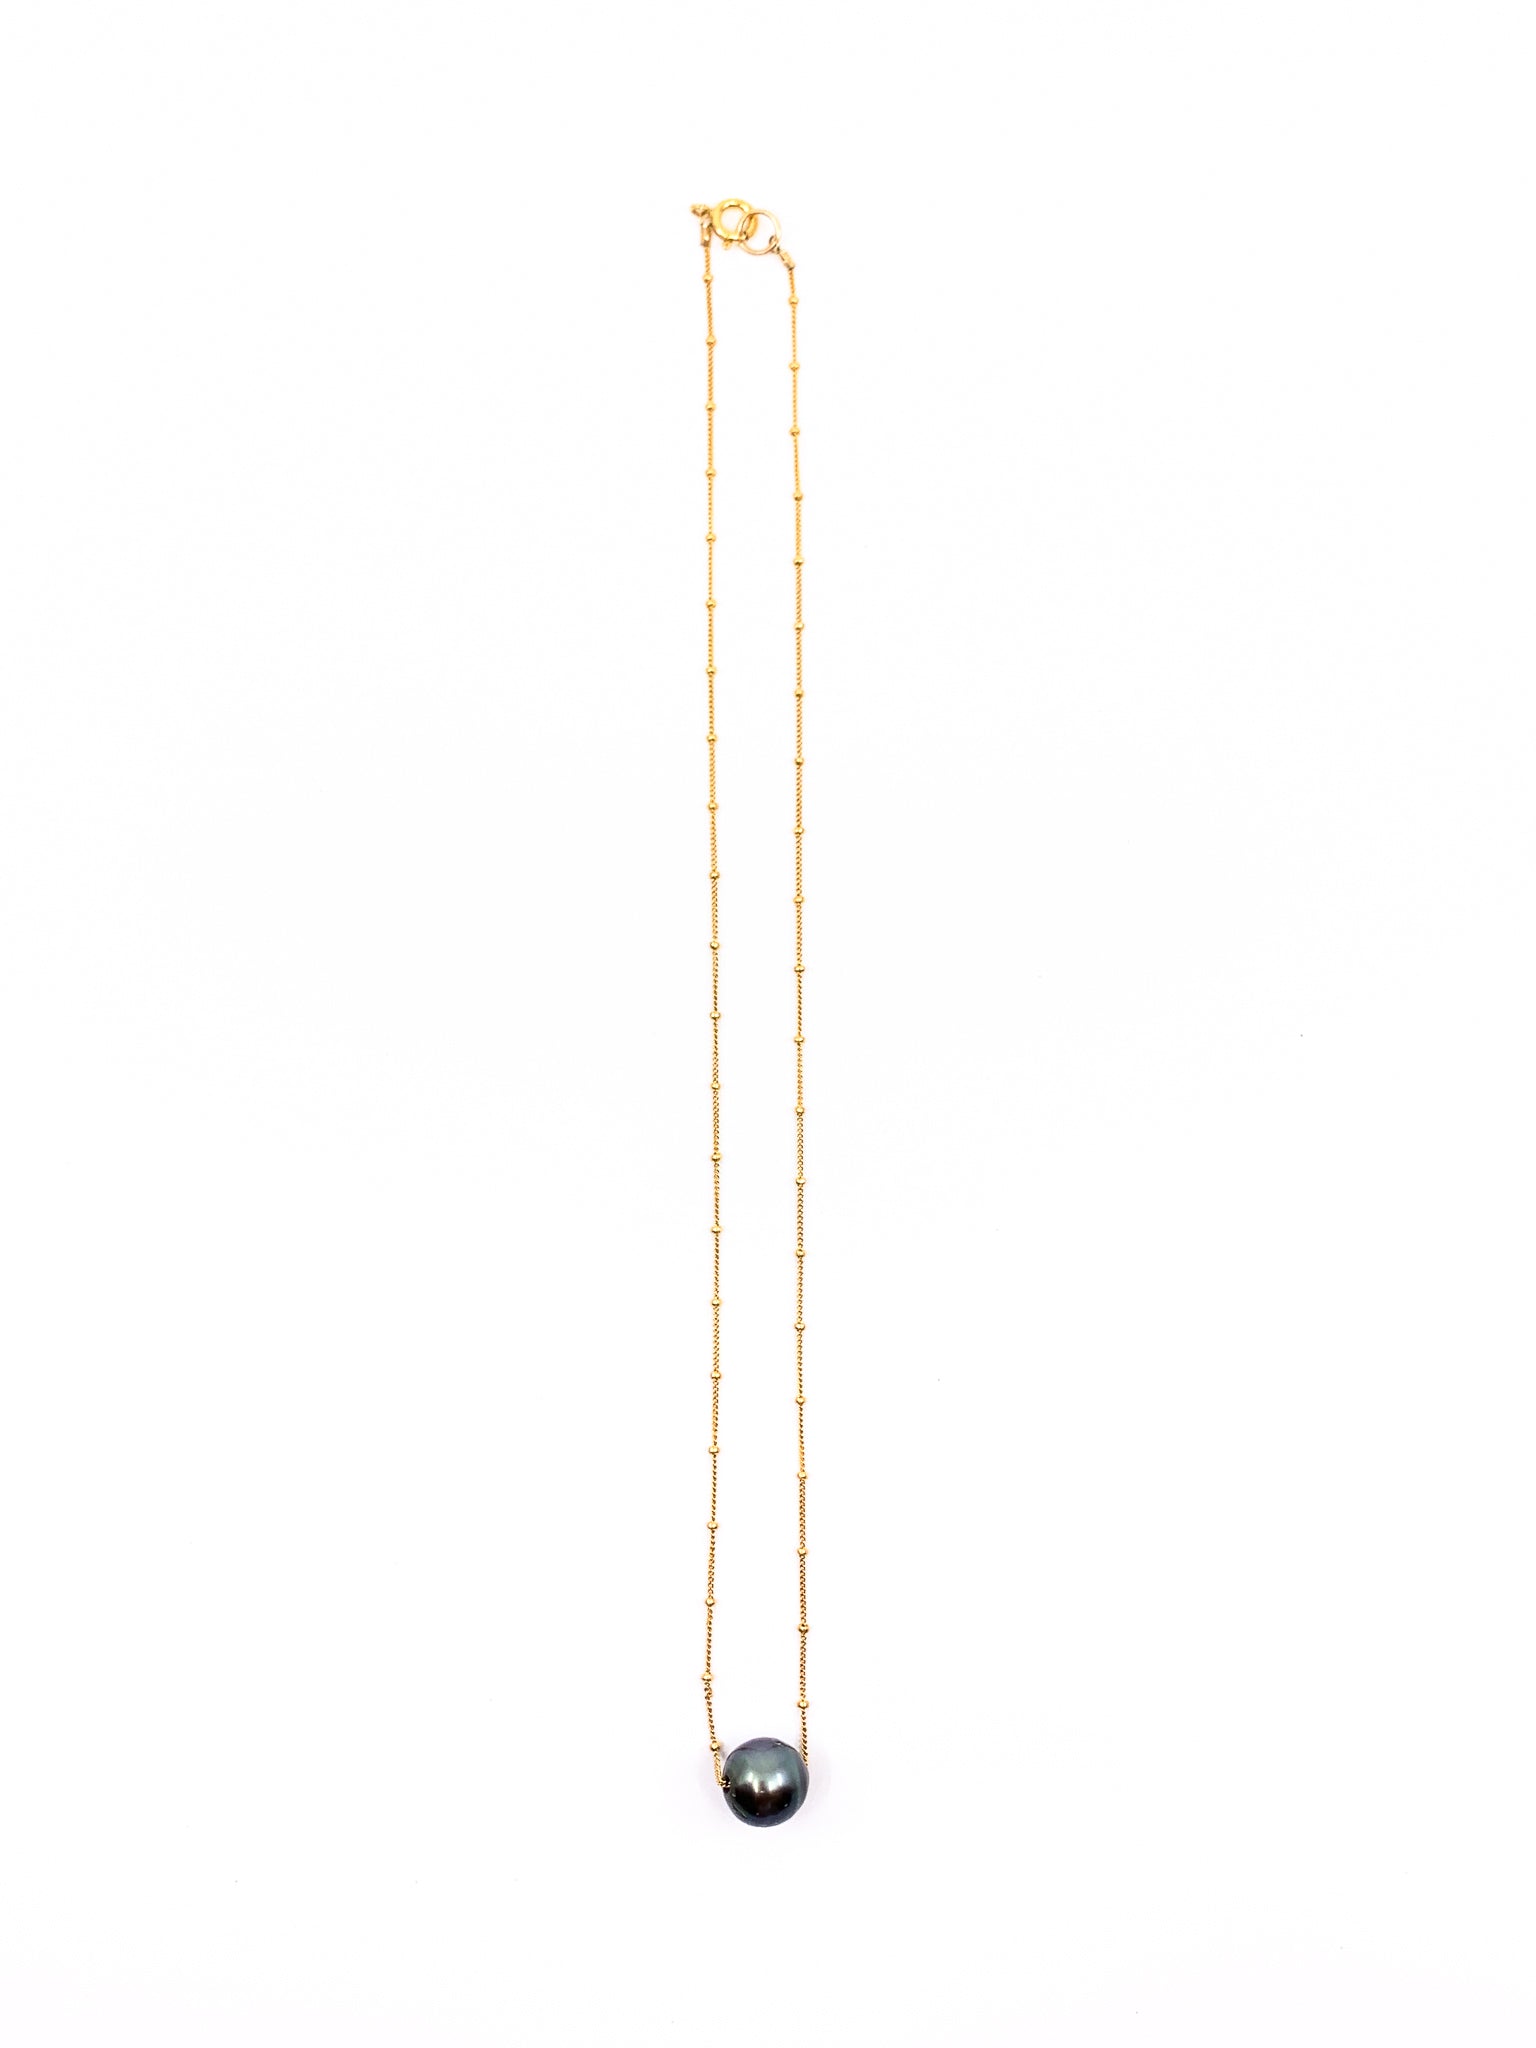 Tahitian pearl delicate gold chain necklace by eve black jewelry made in hawaii